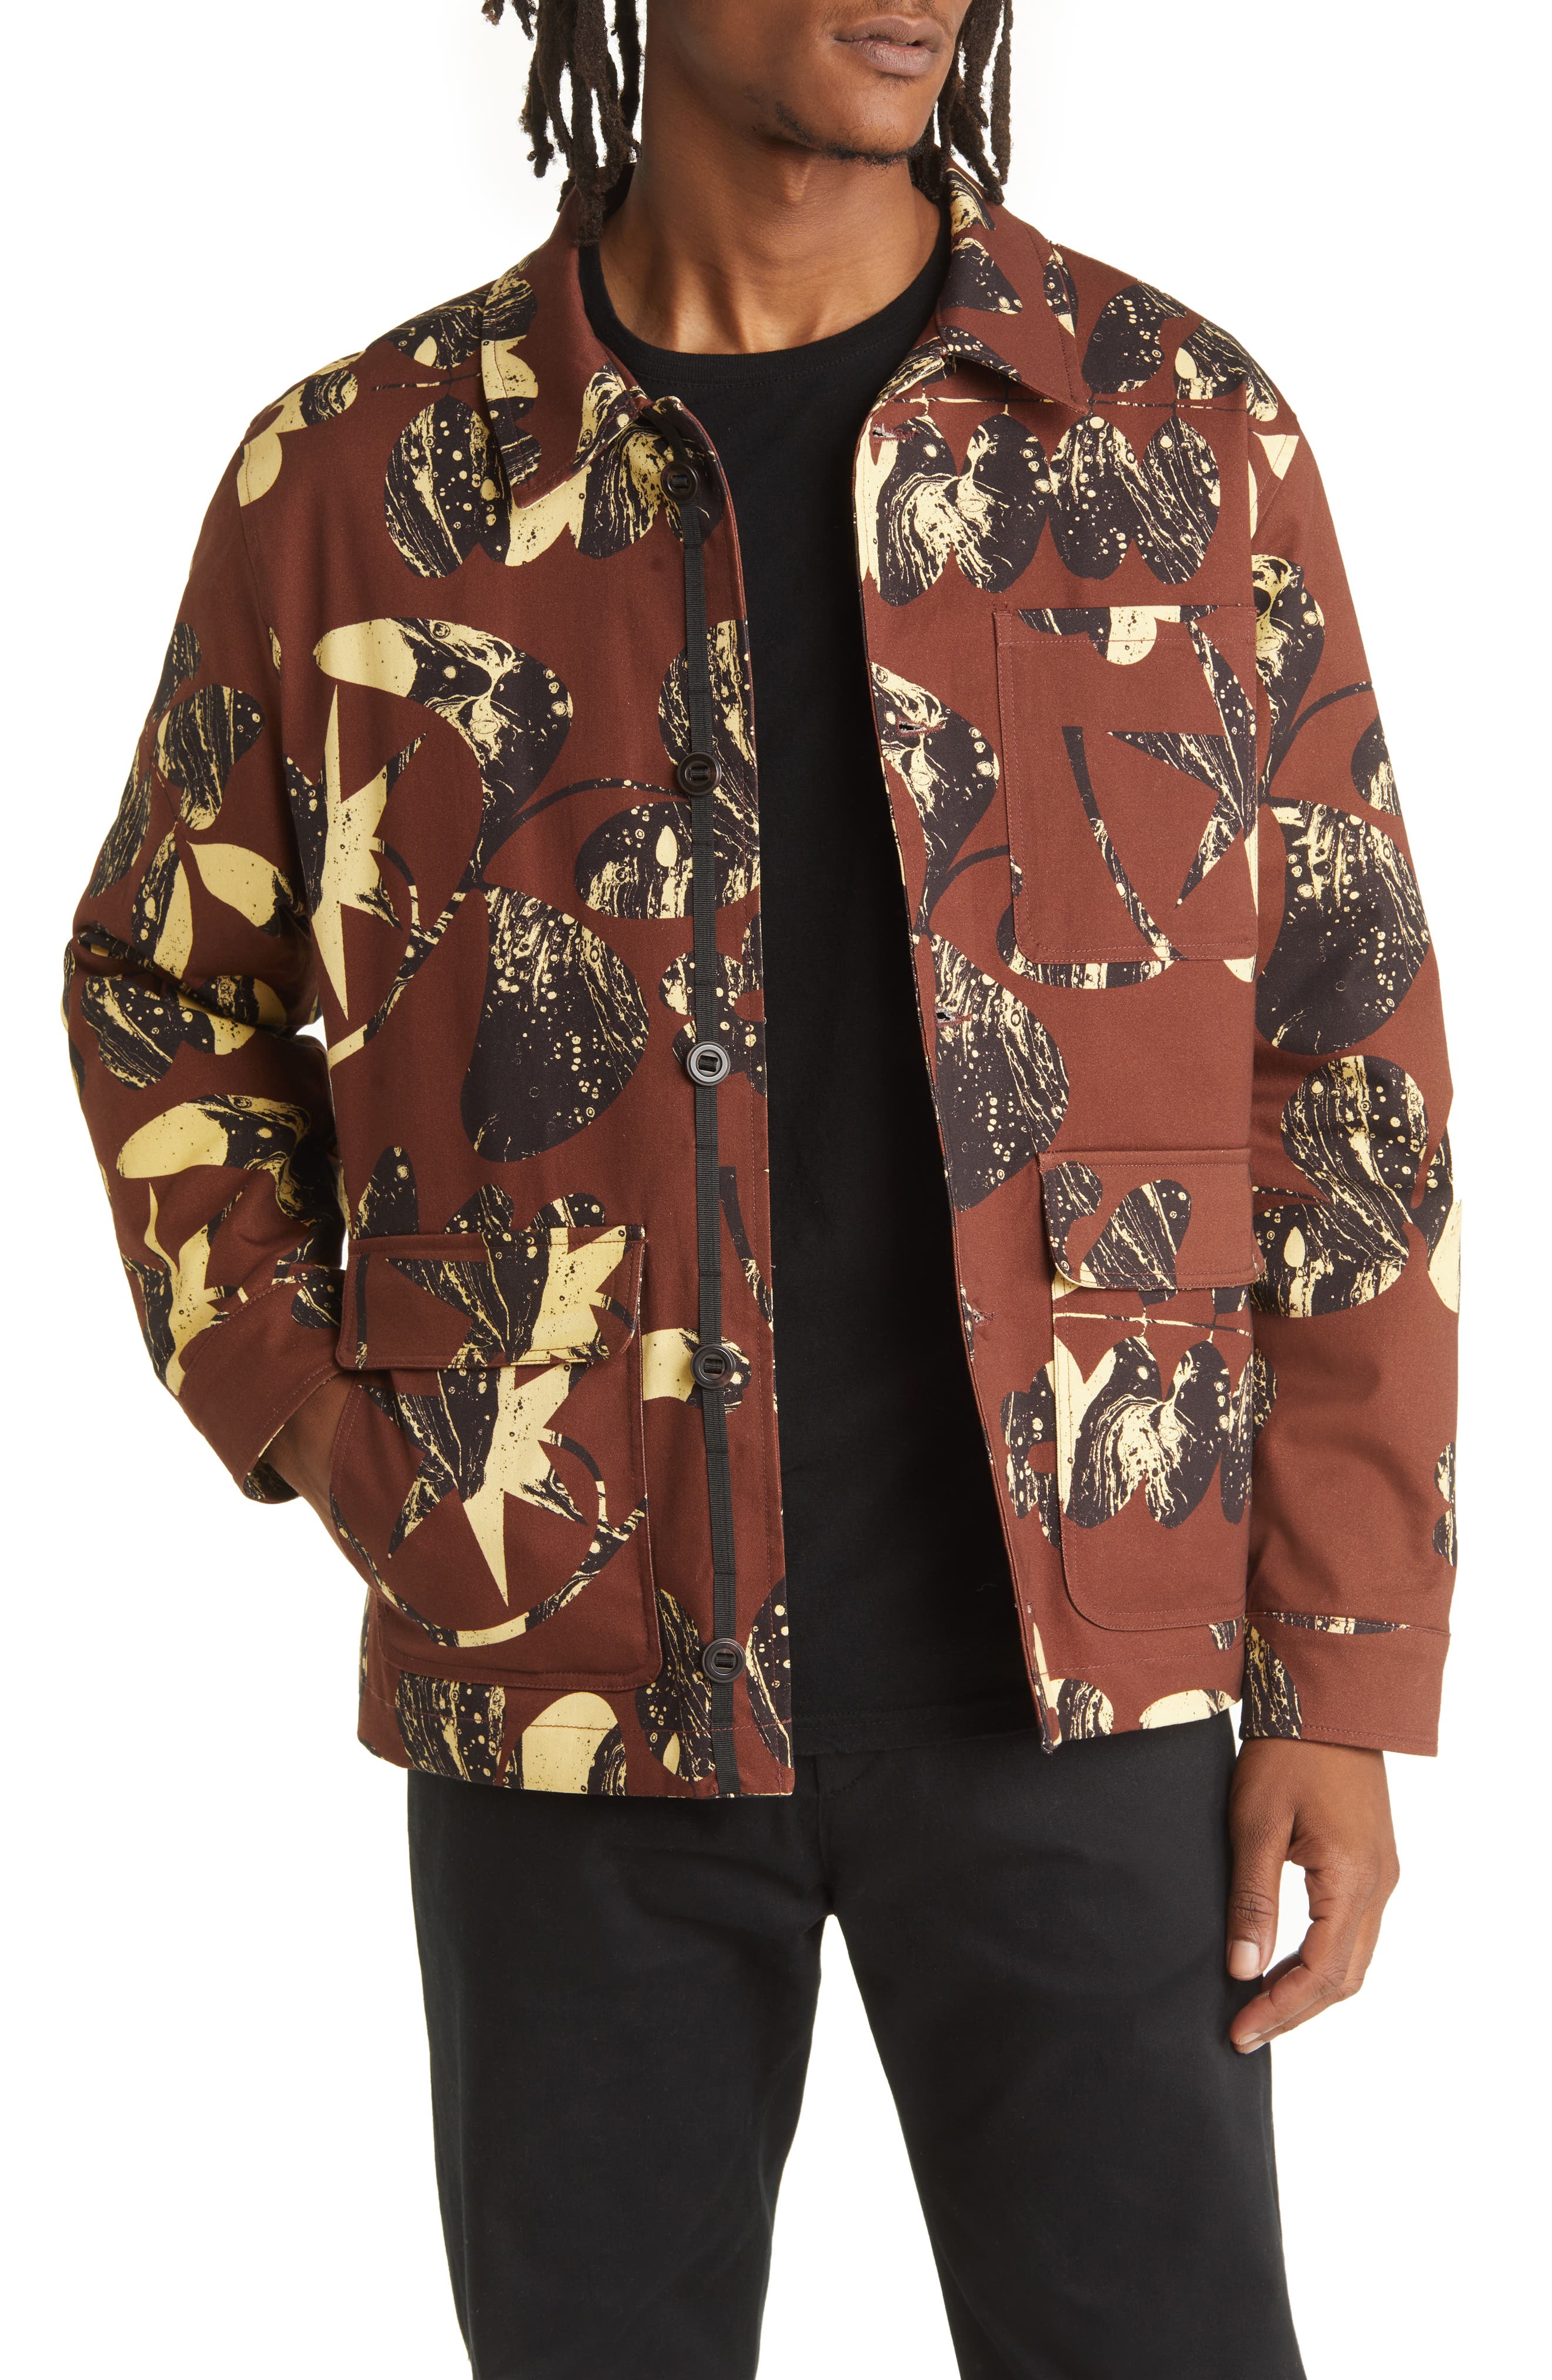 Saturdays NYC Jefferson Brushed Cotton Blend Jacket in Camo